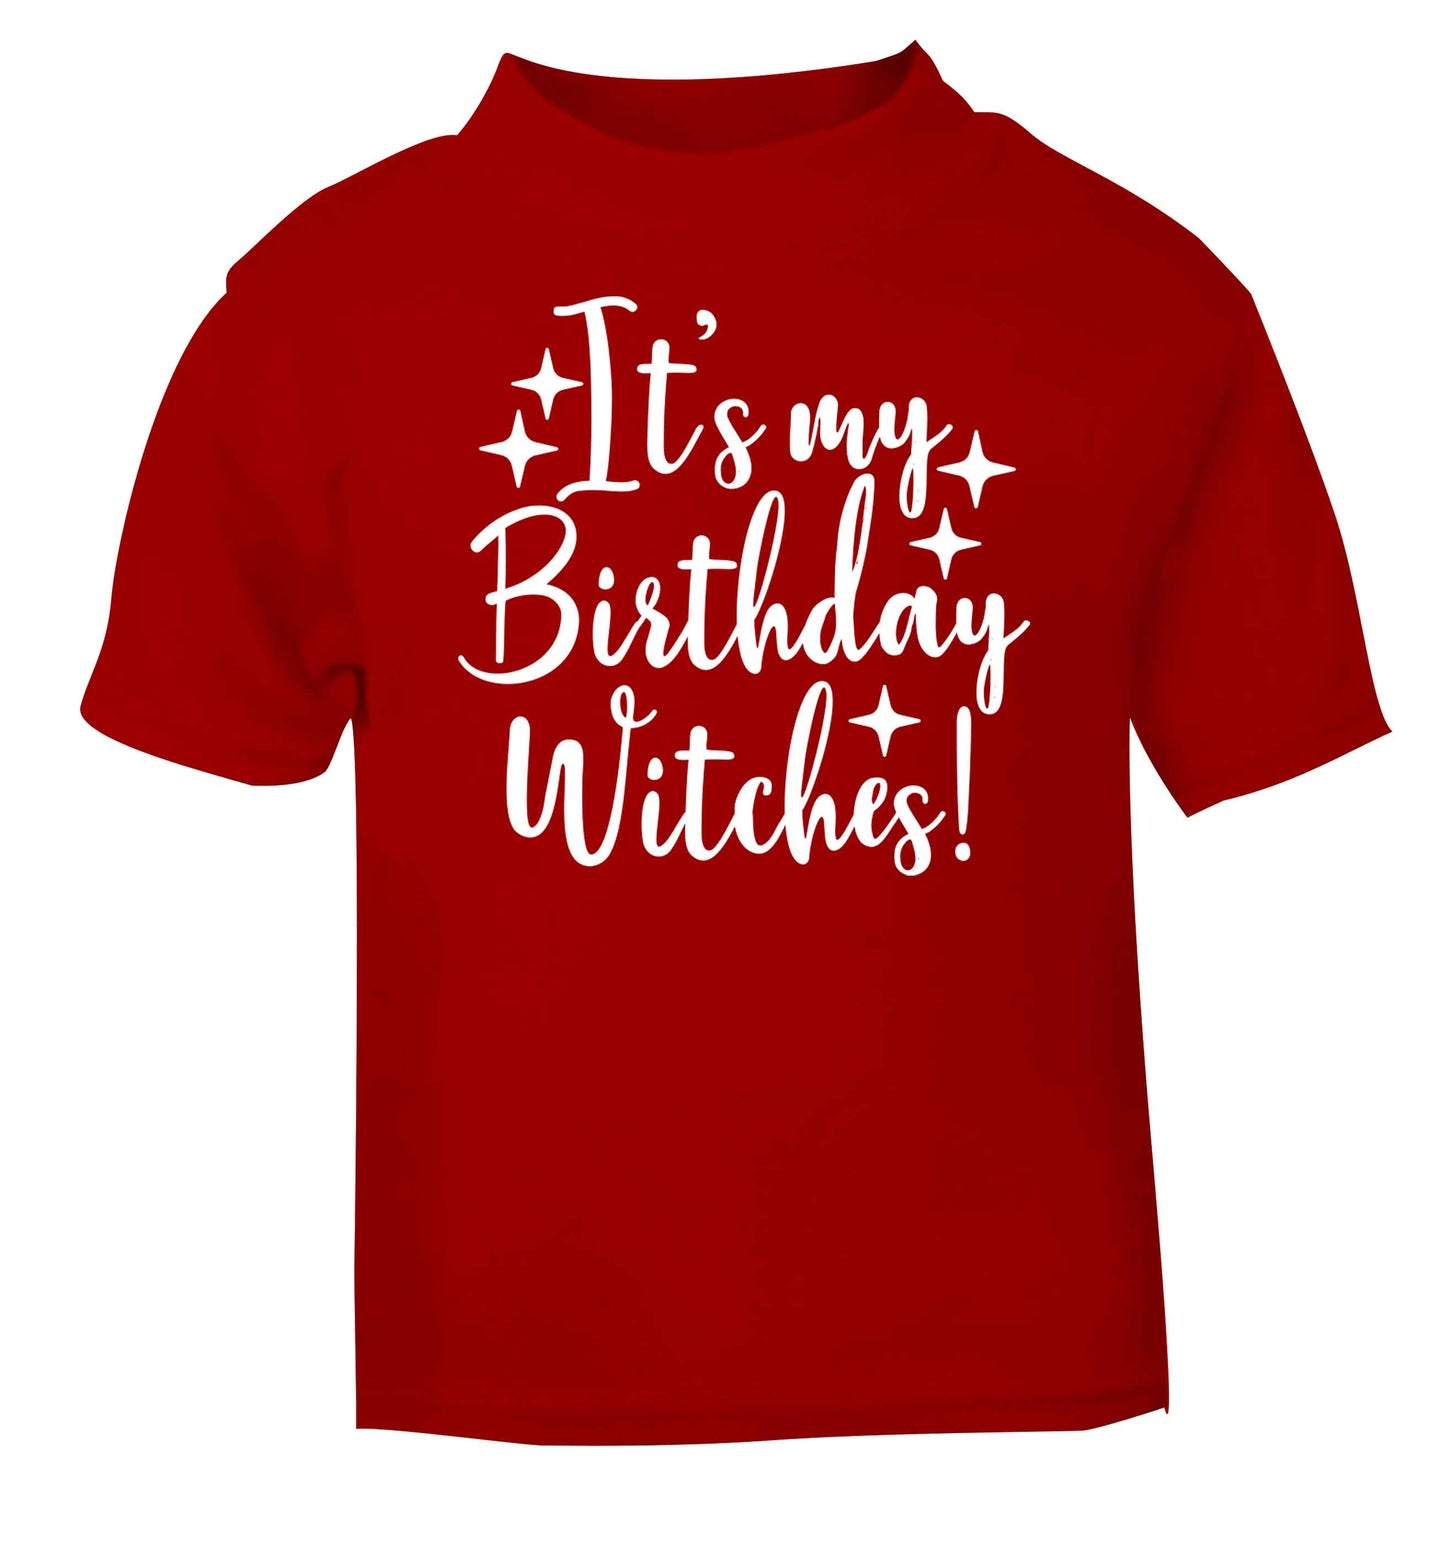 It's my birthday witches!red baby toddler Tshirt 2 Years